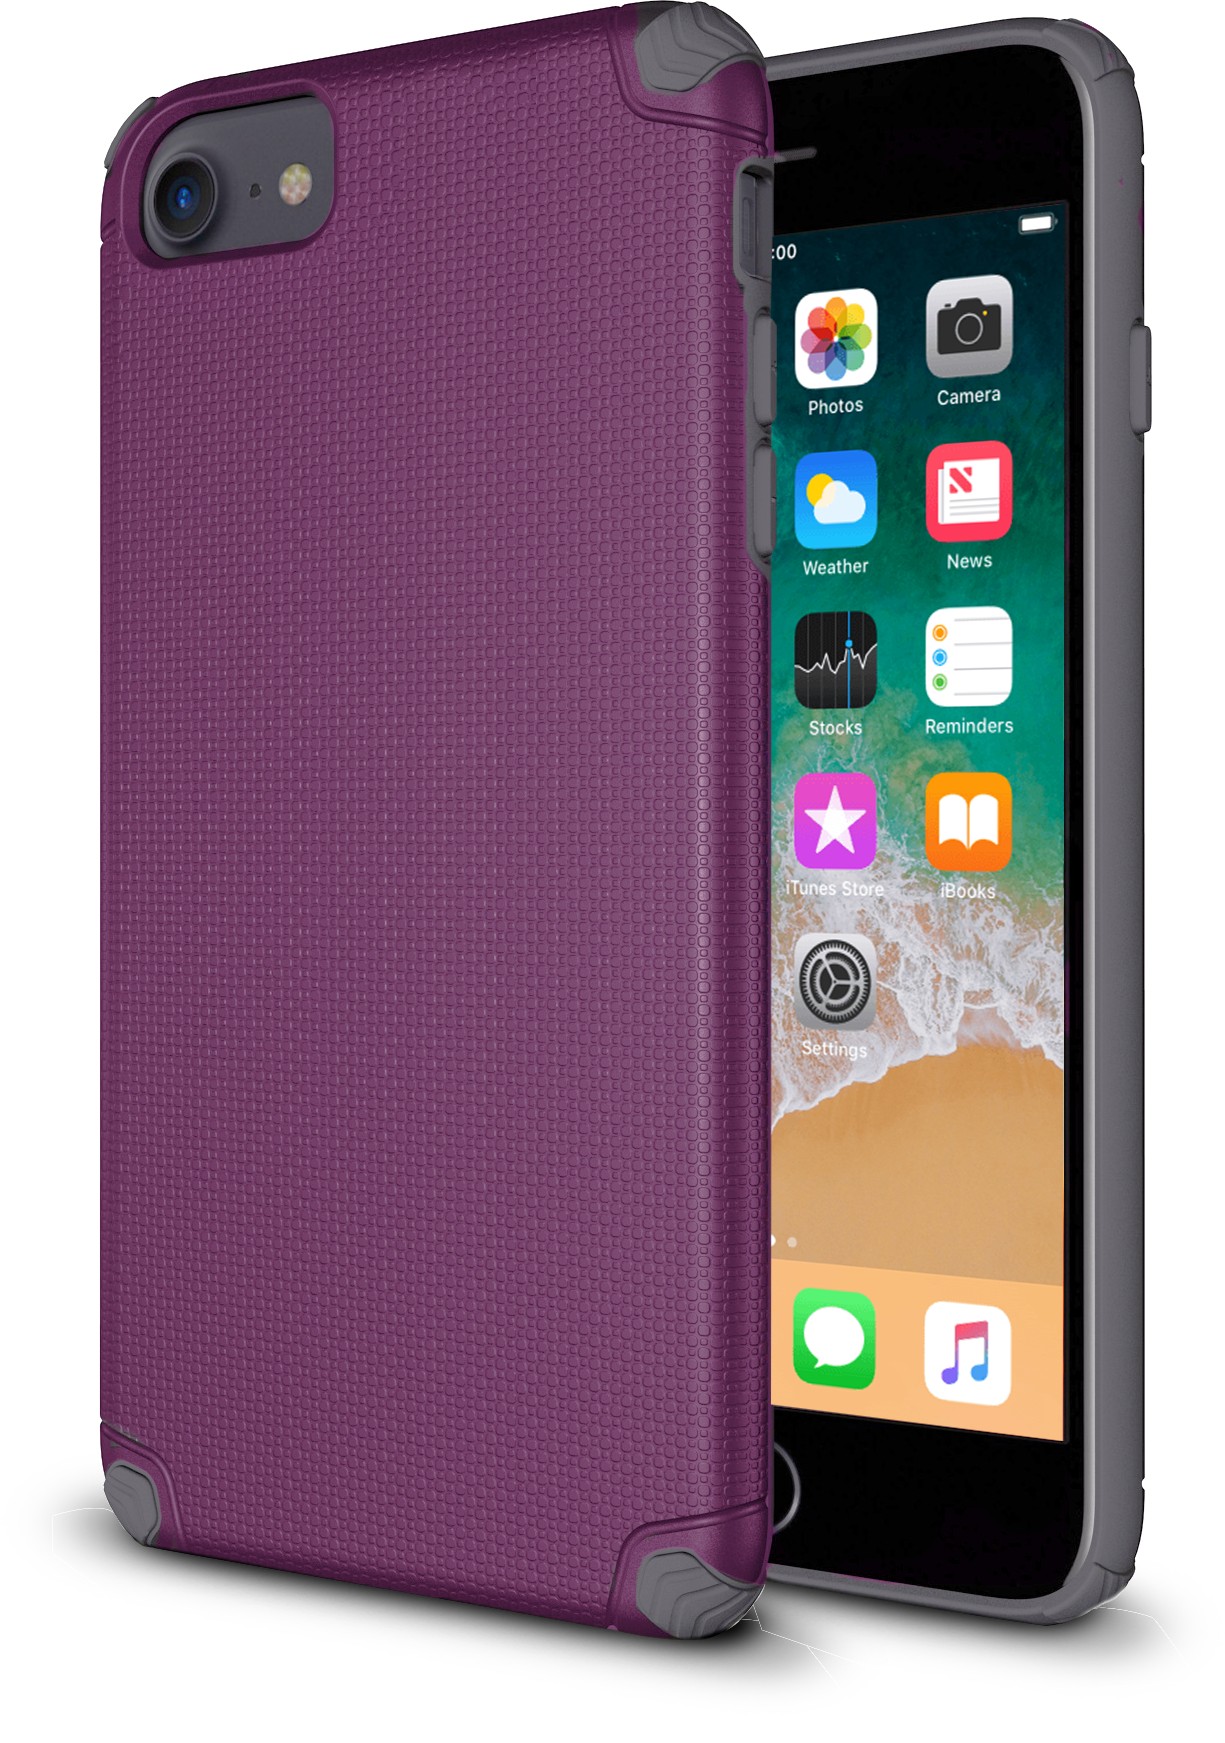 ProTech - Rugged Armor Protective Case for iPhone SE - 6/7/8 - Purple